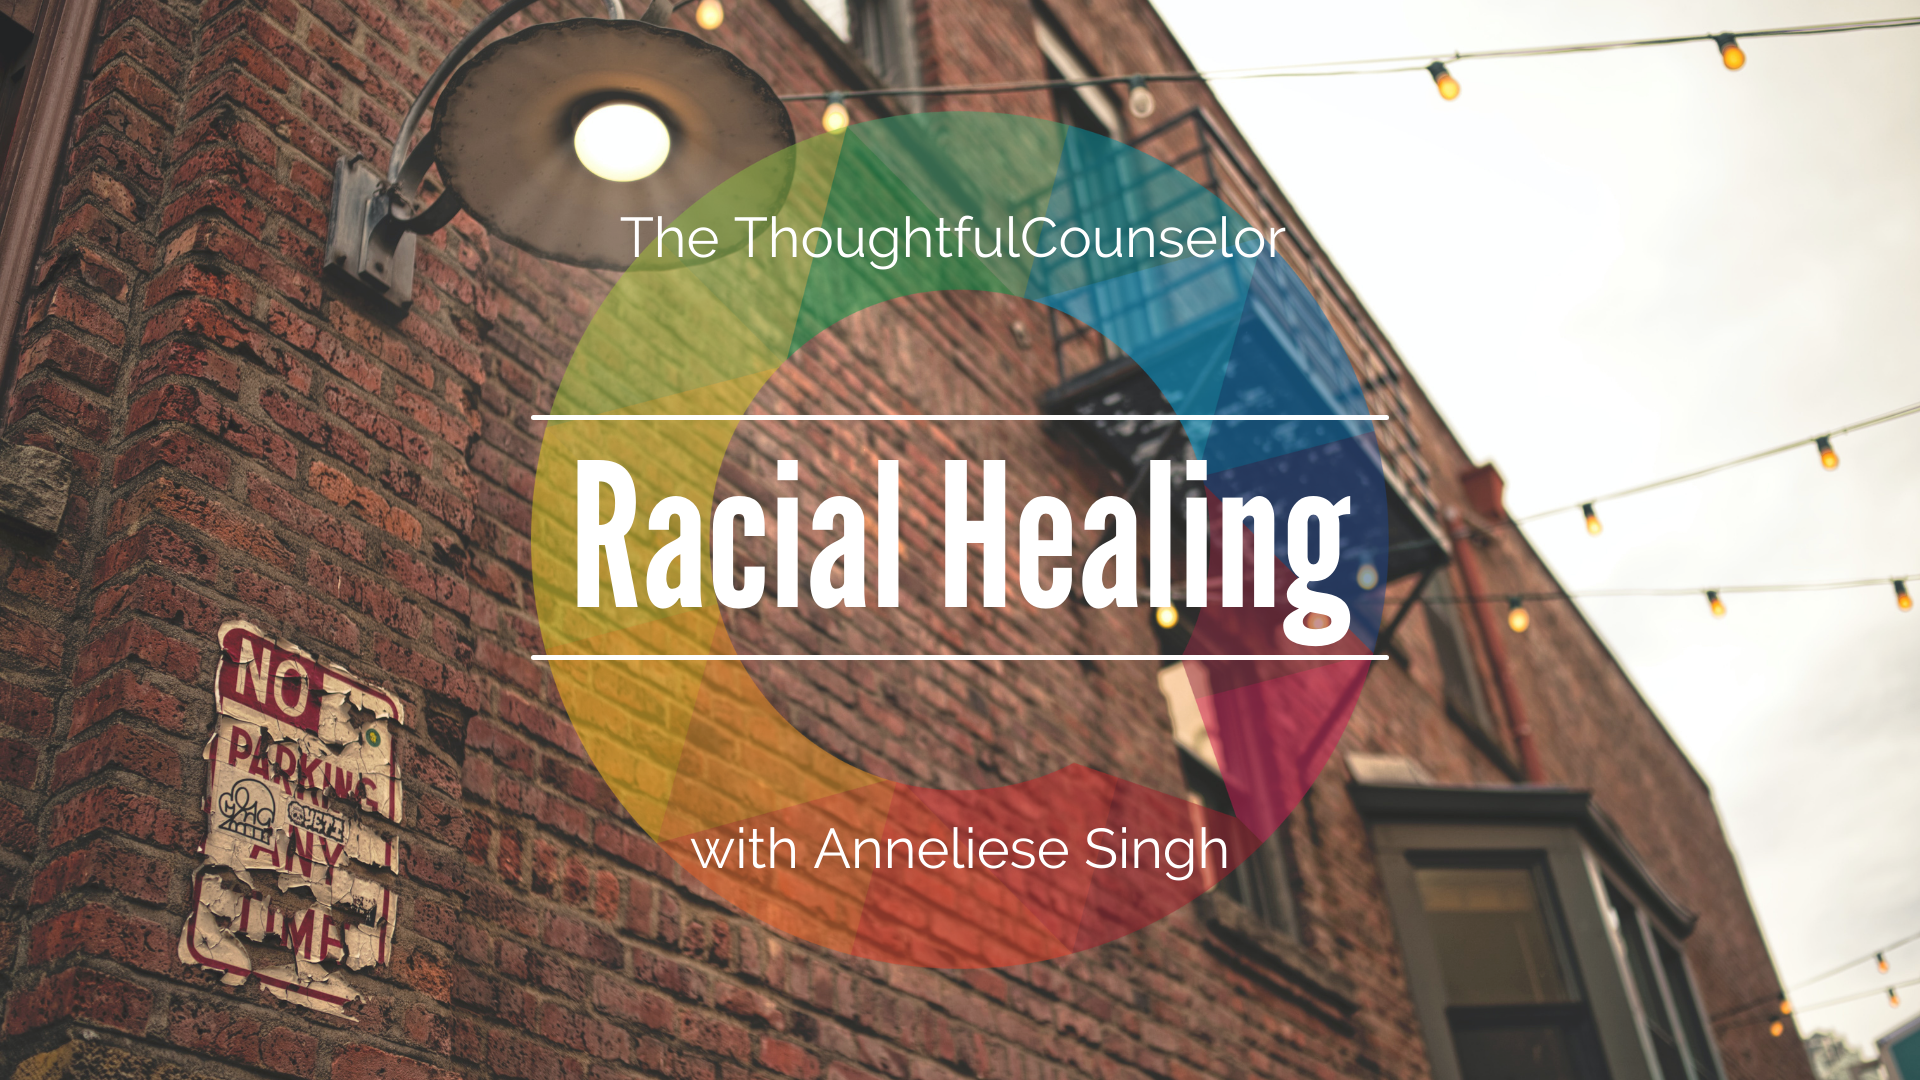 Racial Healing—Understanding racism, meaningful allyship, and reclaiming your whole self